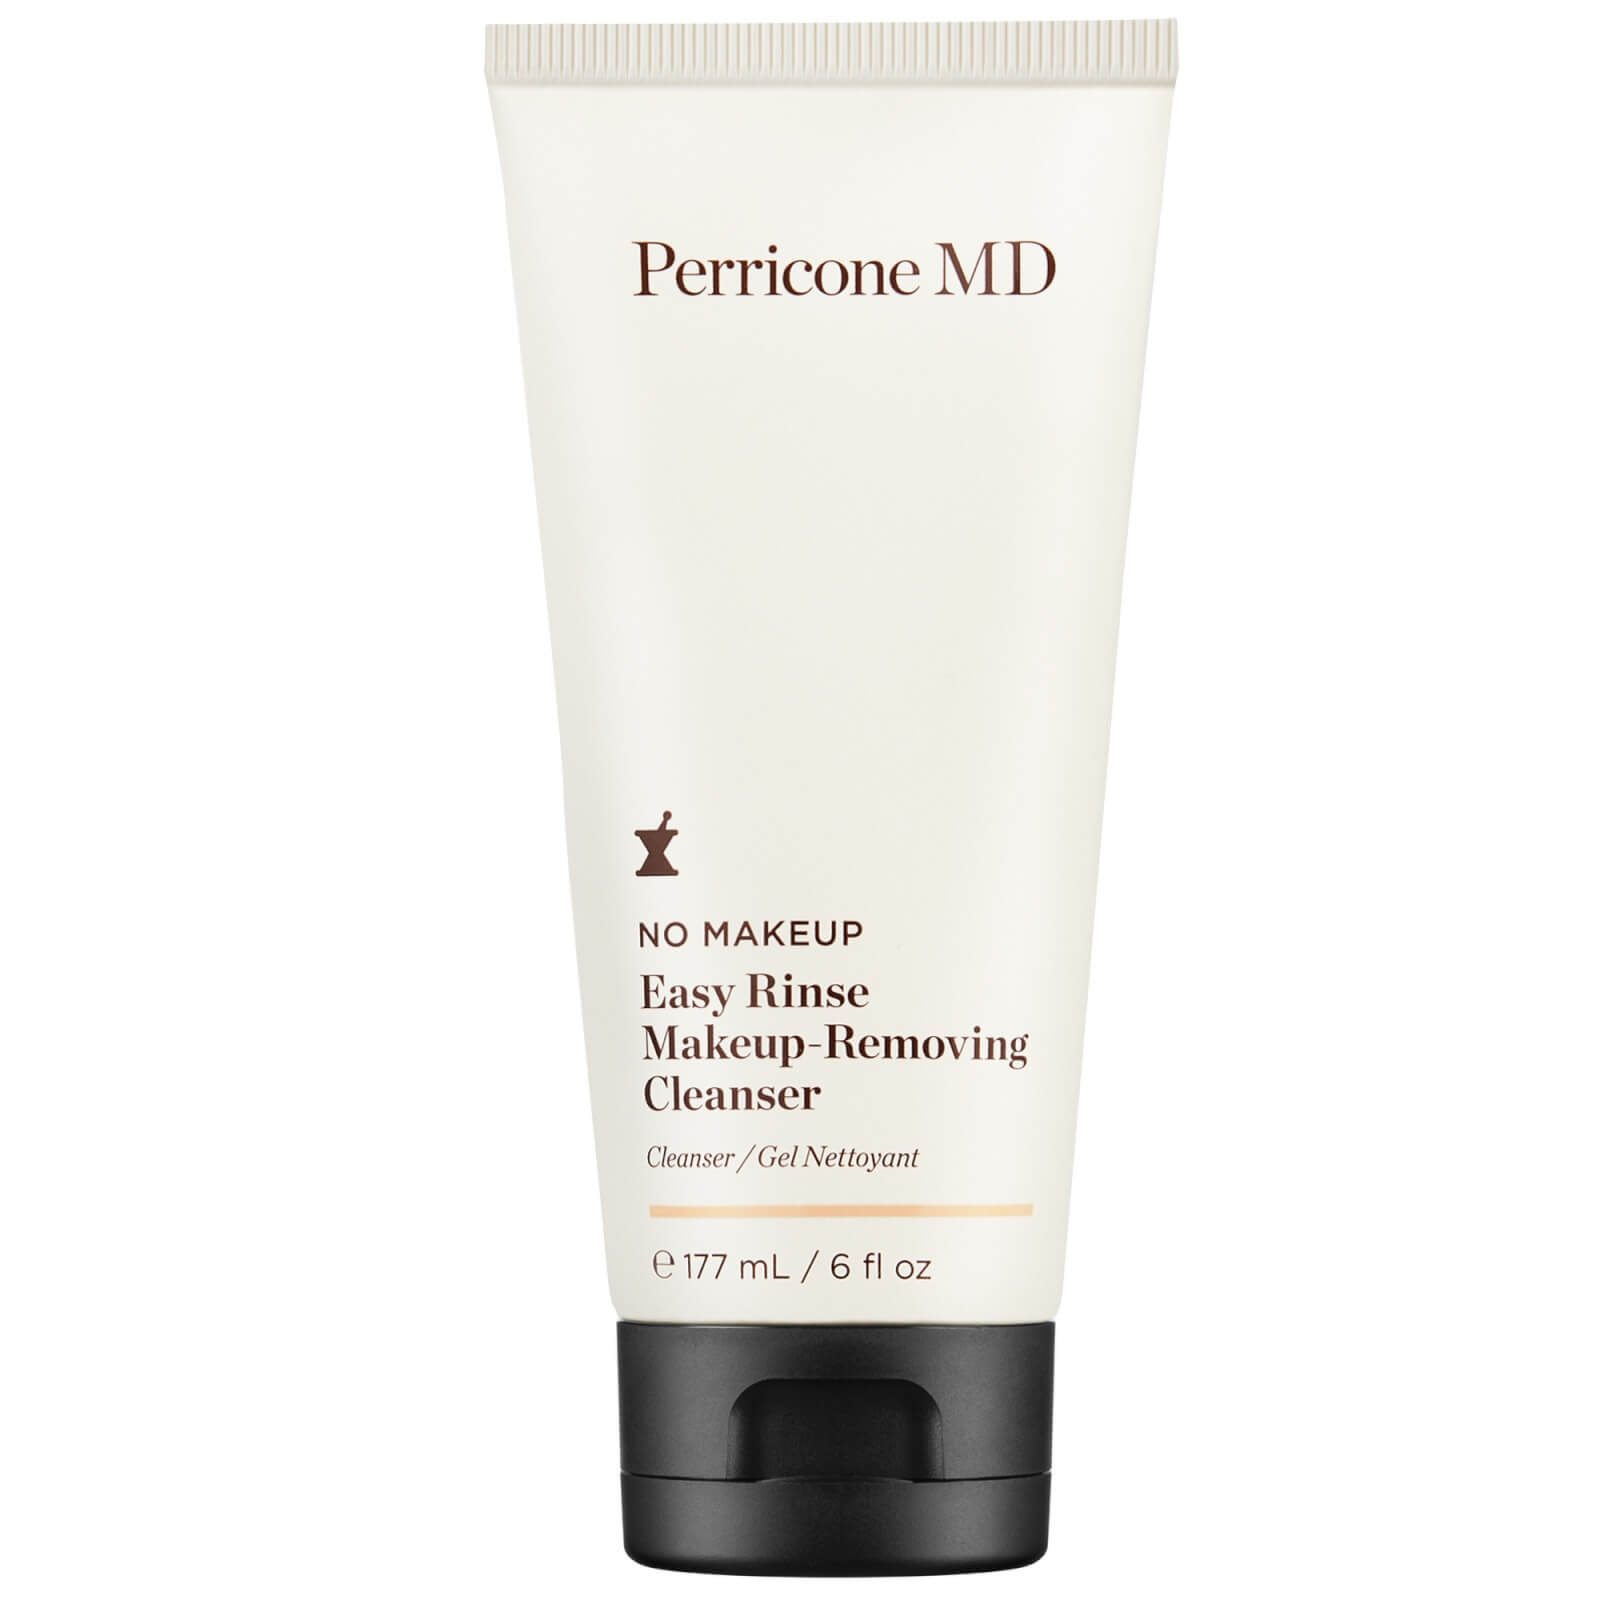 Perricone MD No Makeup Easy Rinse Makeup-Removing Cleanser - 6 oz / 117ml